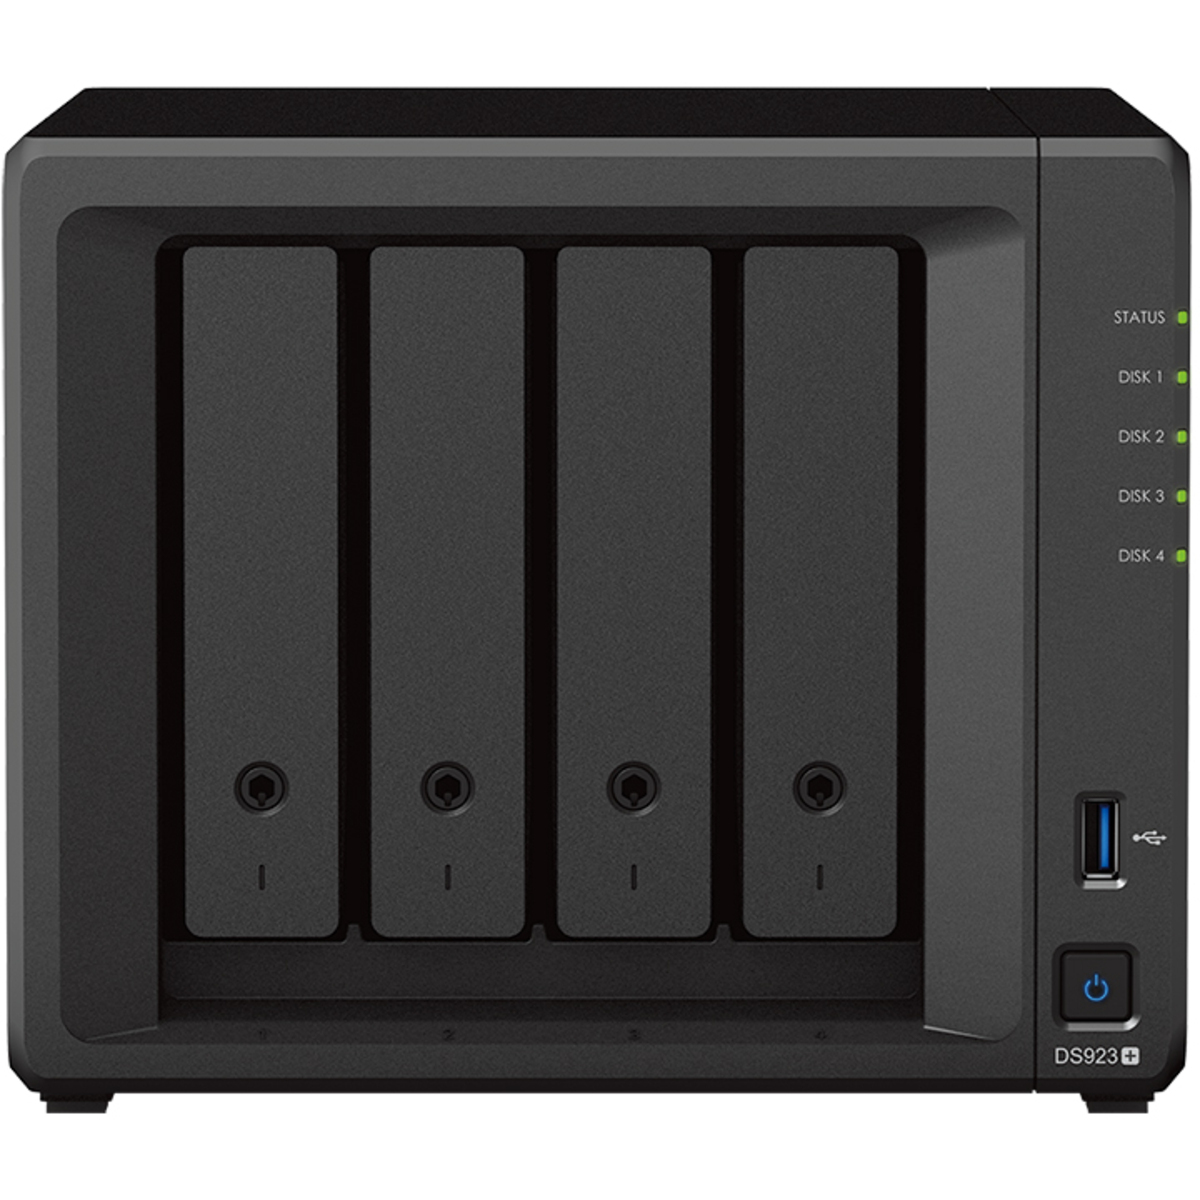 Synology DiskStation DS923+ 30tb 4-Bay Desktop Multimedia / Power User / Business NAS - Network Attached Storage Device 3x10tb Seagate IronWolf Pro ST10000NT001 3.5 7200rpm SATA 6Gb/s HDD NAS Class Drives Installed - Burn-In Tested - ON SALE - FREE RAM UPGRADE DiskStation DS923+